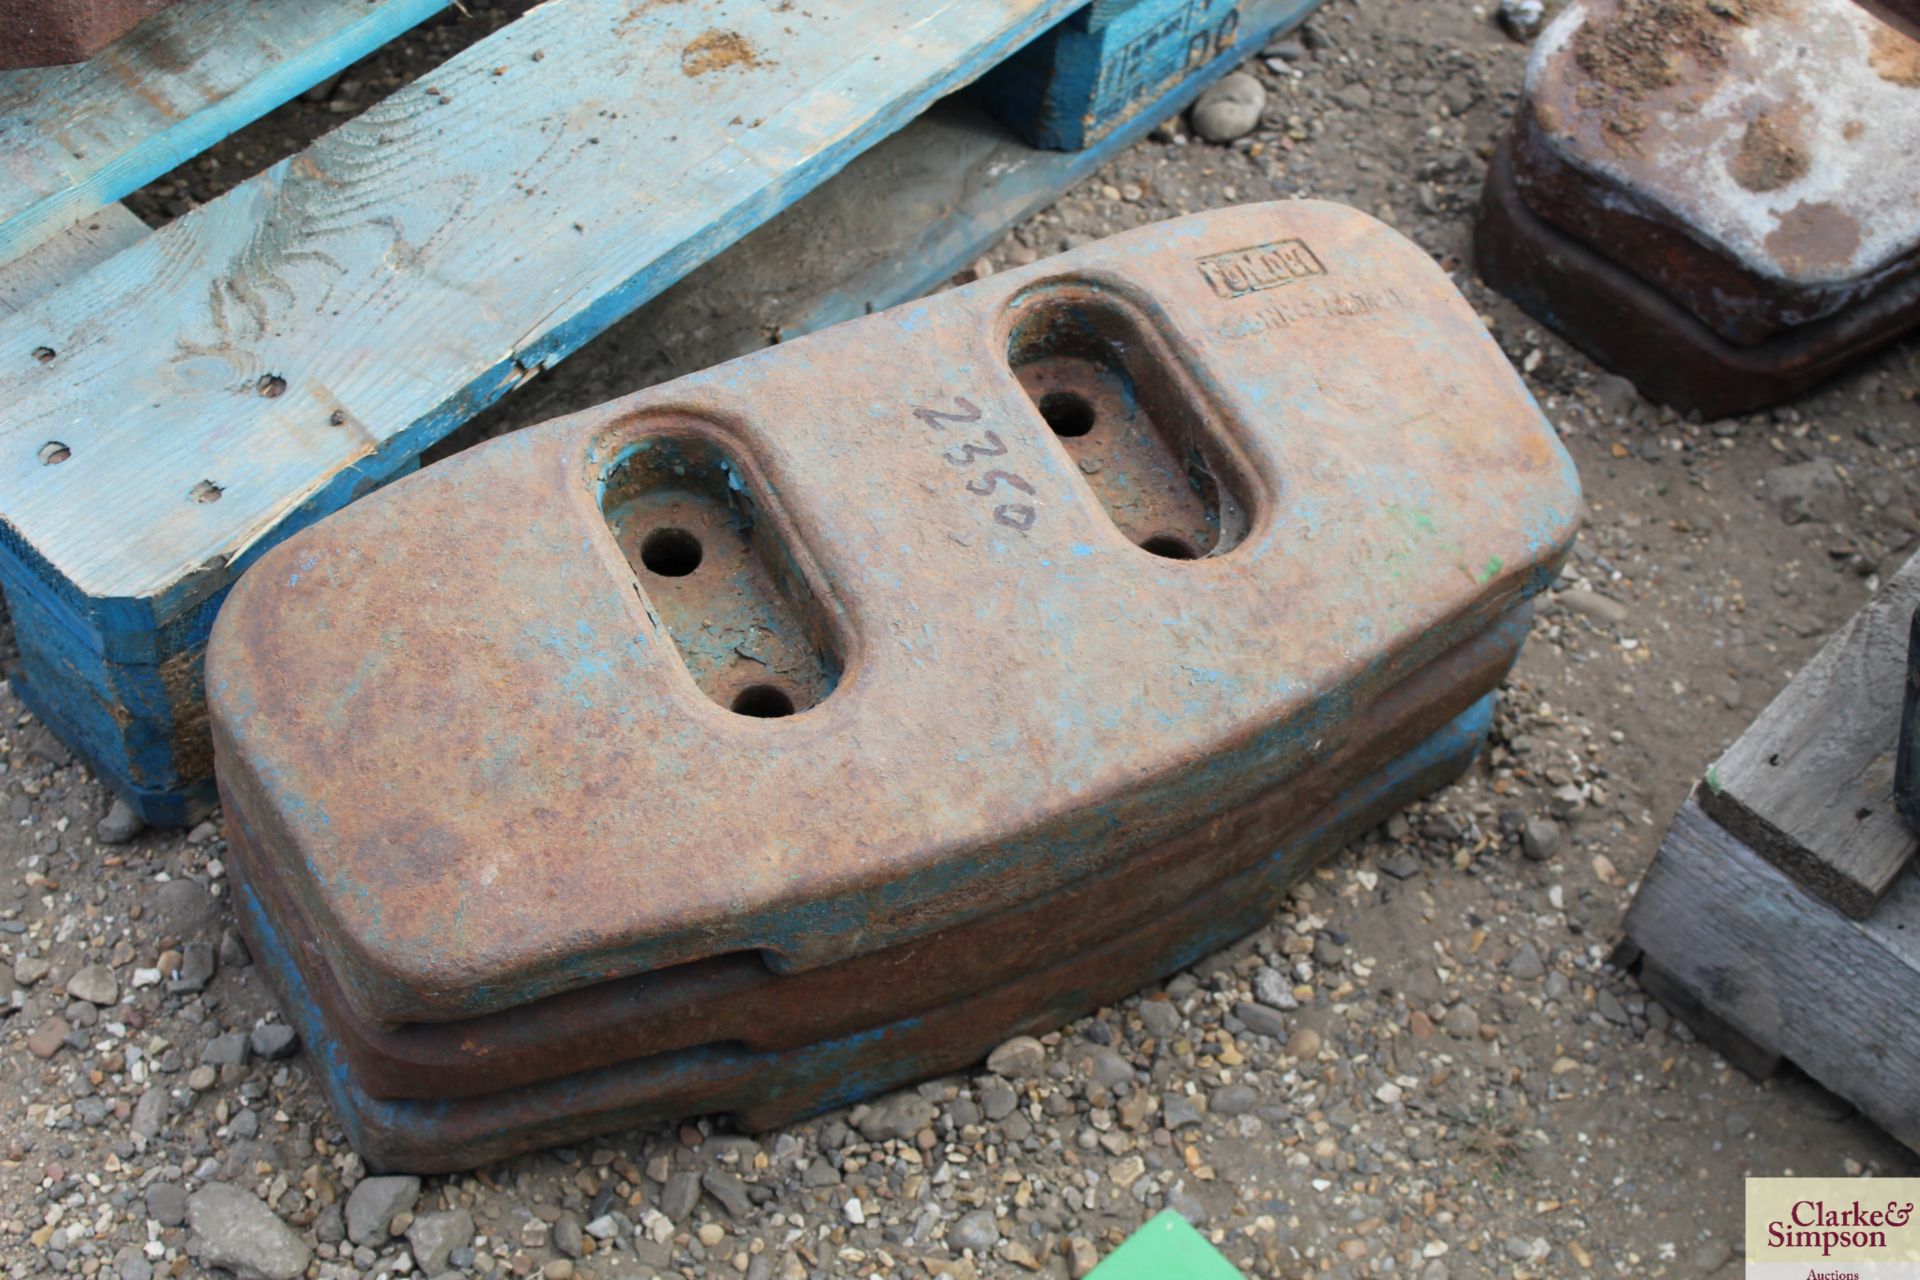 3x Ford FoMoCo front weights.